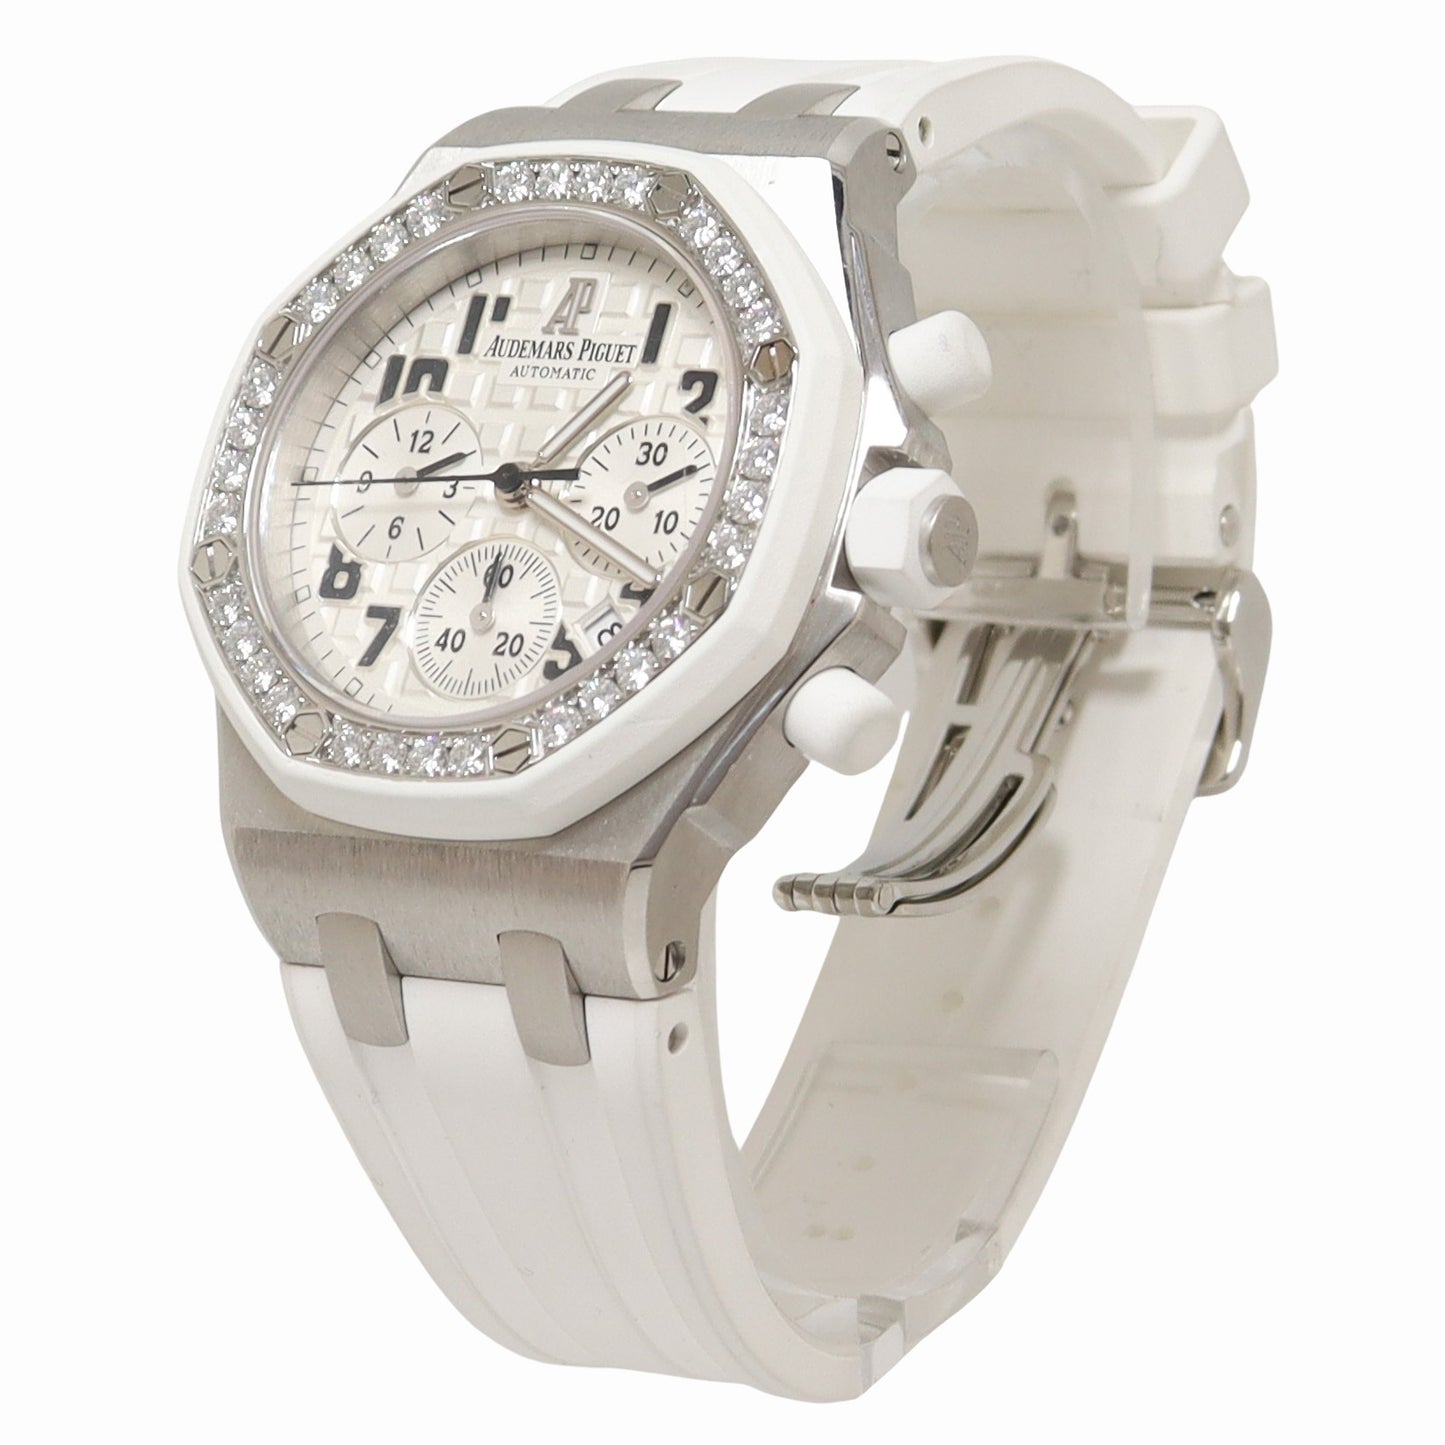 Audemars Piguet Royal Oak Offshore 37mm White Chonograph Dial Watch Reference# 26048SK.ZZ.D010CA.01 - Happy Jewelers Fine Jewelry Lifetime Warranty